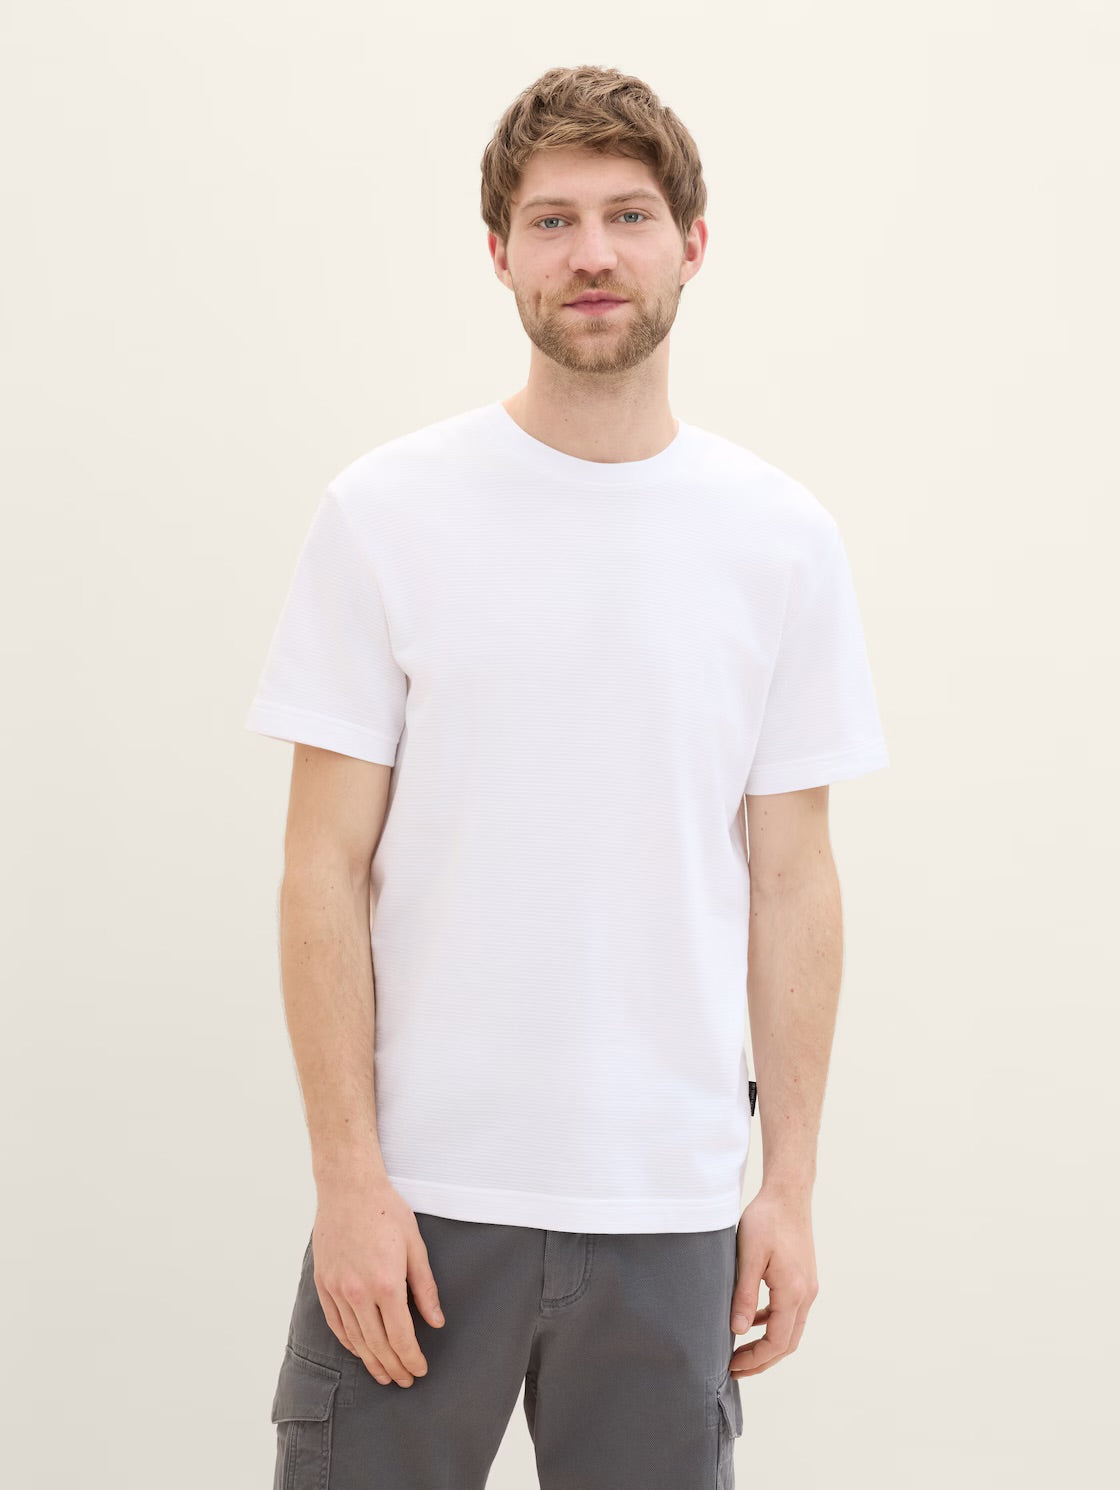 Structured T-shirt